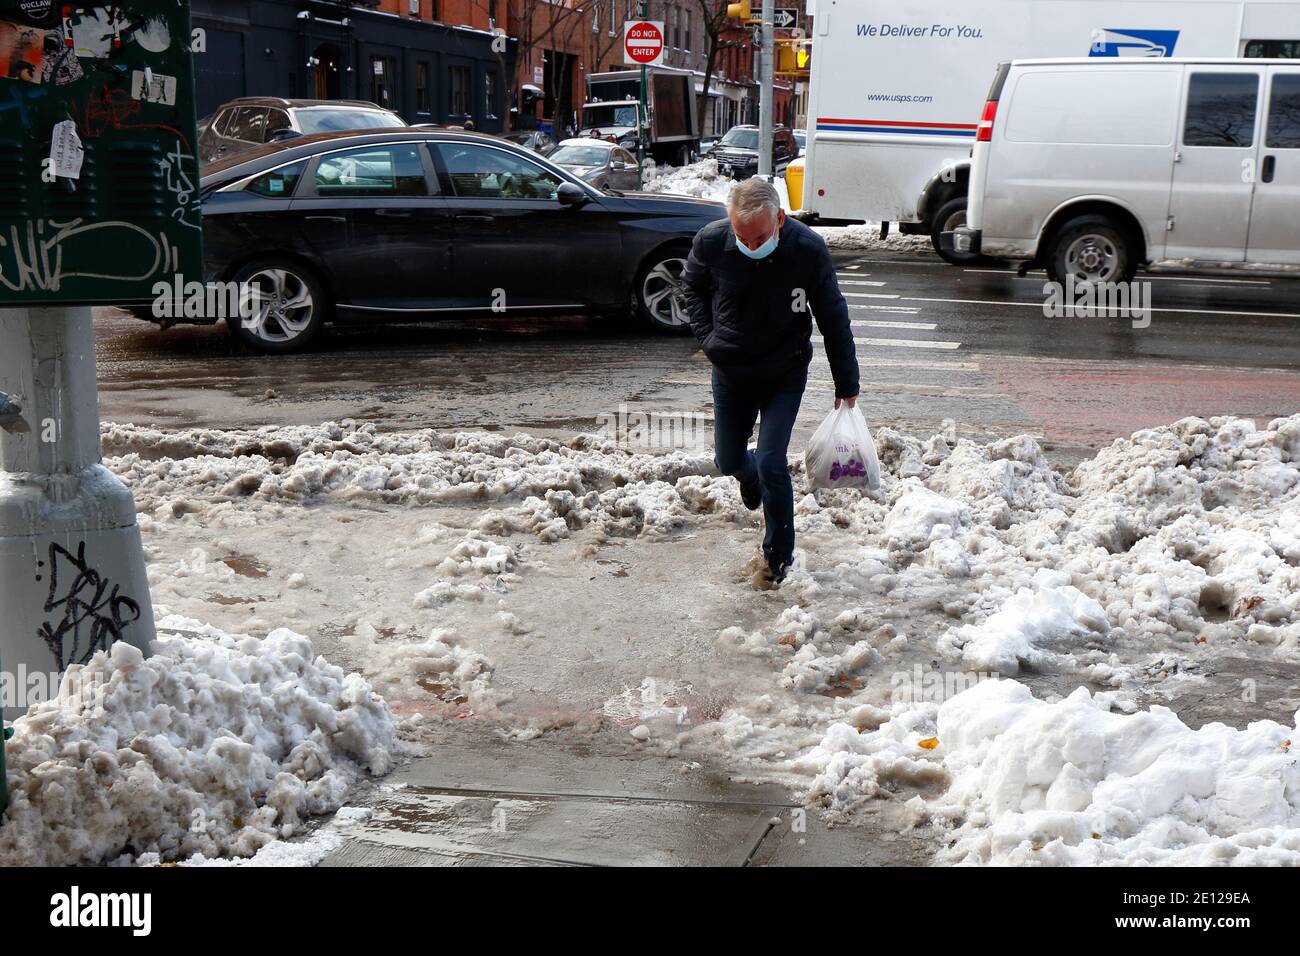 A person stumbles into ankle-deep dirty slush water at a crosswalk resulting from melting snow and clogged sewers in New York City Stock Photo